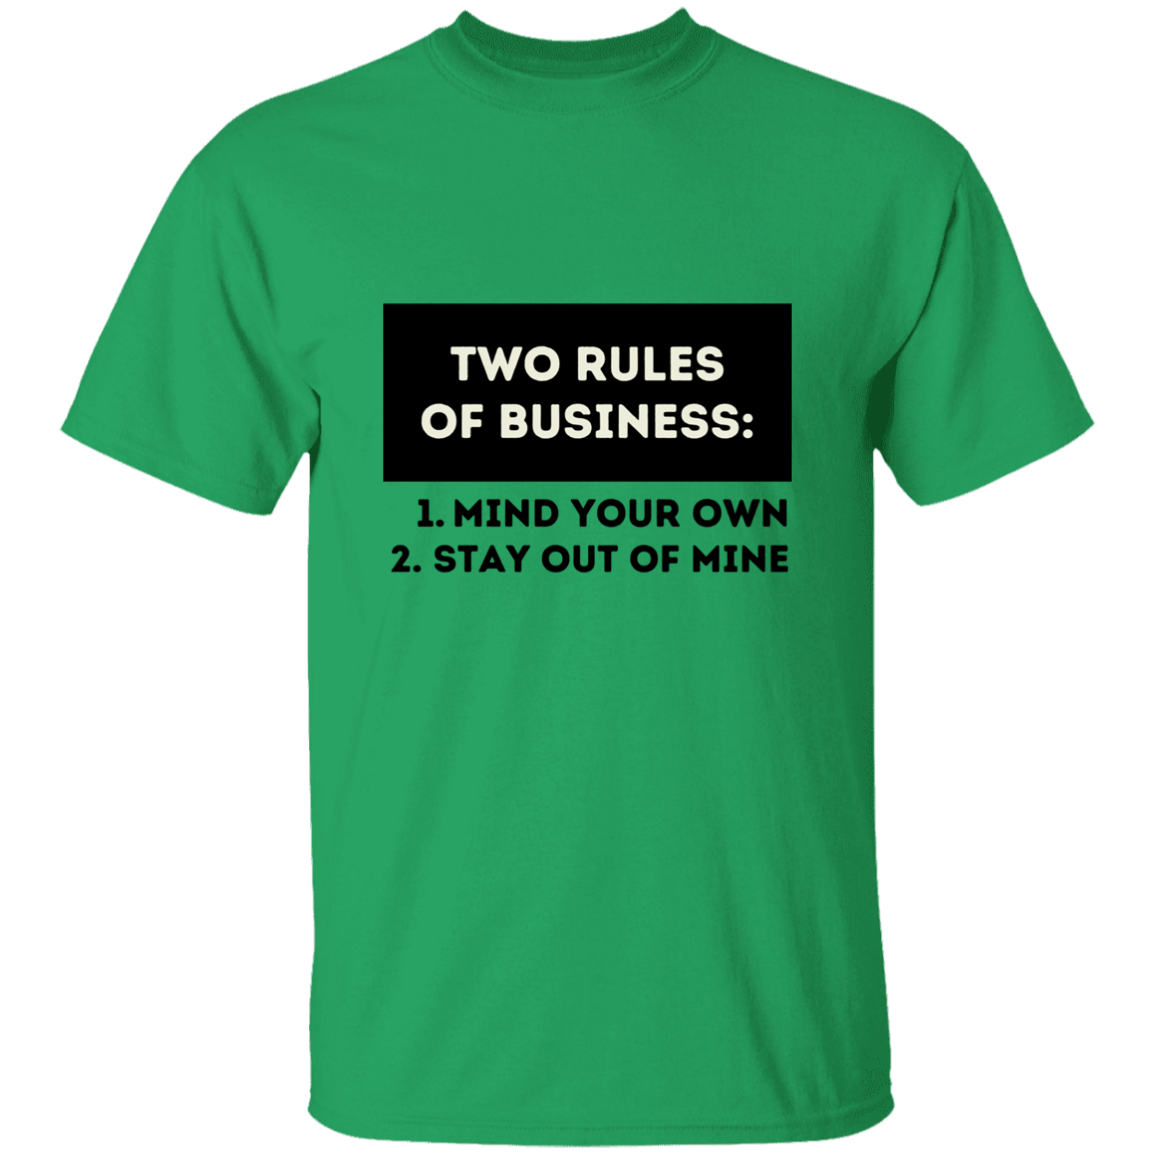 Two Rules of Business T-Shirt, Funny Quote Shirts, Feminist Shirt, Novelty T-shirt, Sarcastic T-shirt